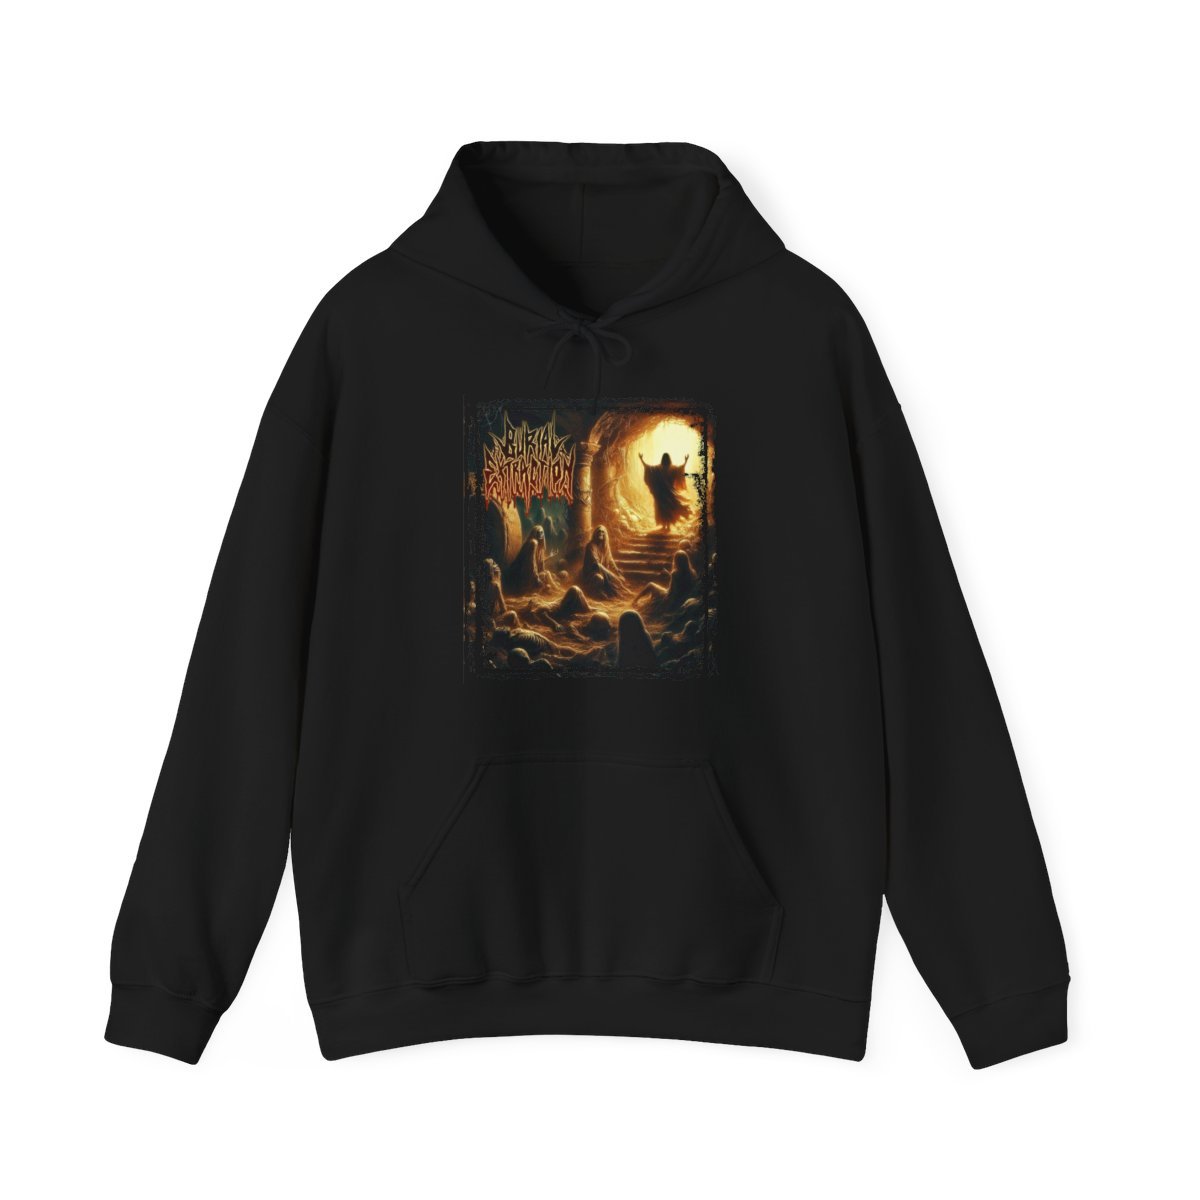 Burial Extraction – The Firstborn From The Dead Pullover Hooded Sweatshirt